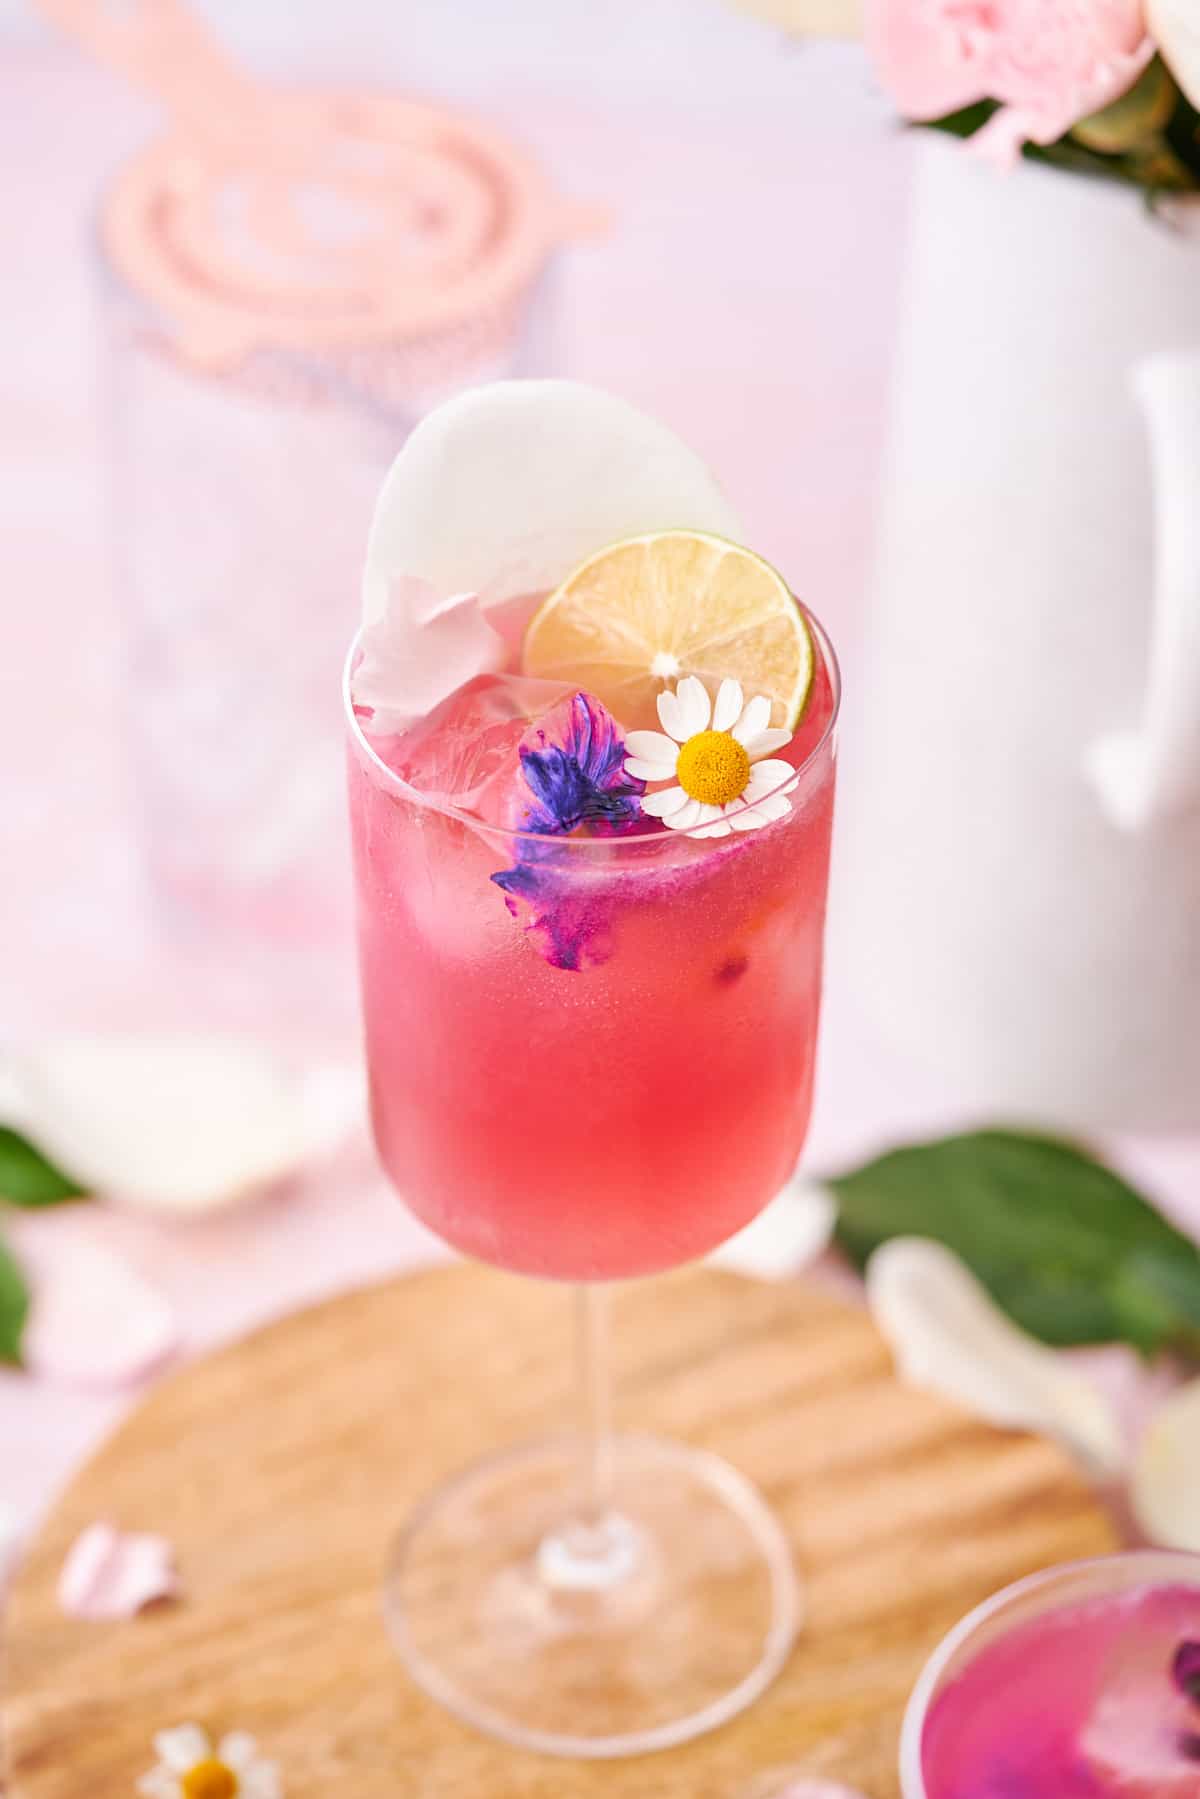 45-degree shot down of a bright pink floradora cocktail, with a wooden round trivet underneath, a mixing glass behind it, a white ceramic vase, and flower petals. 